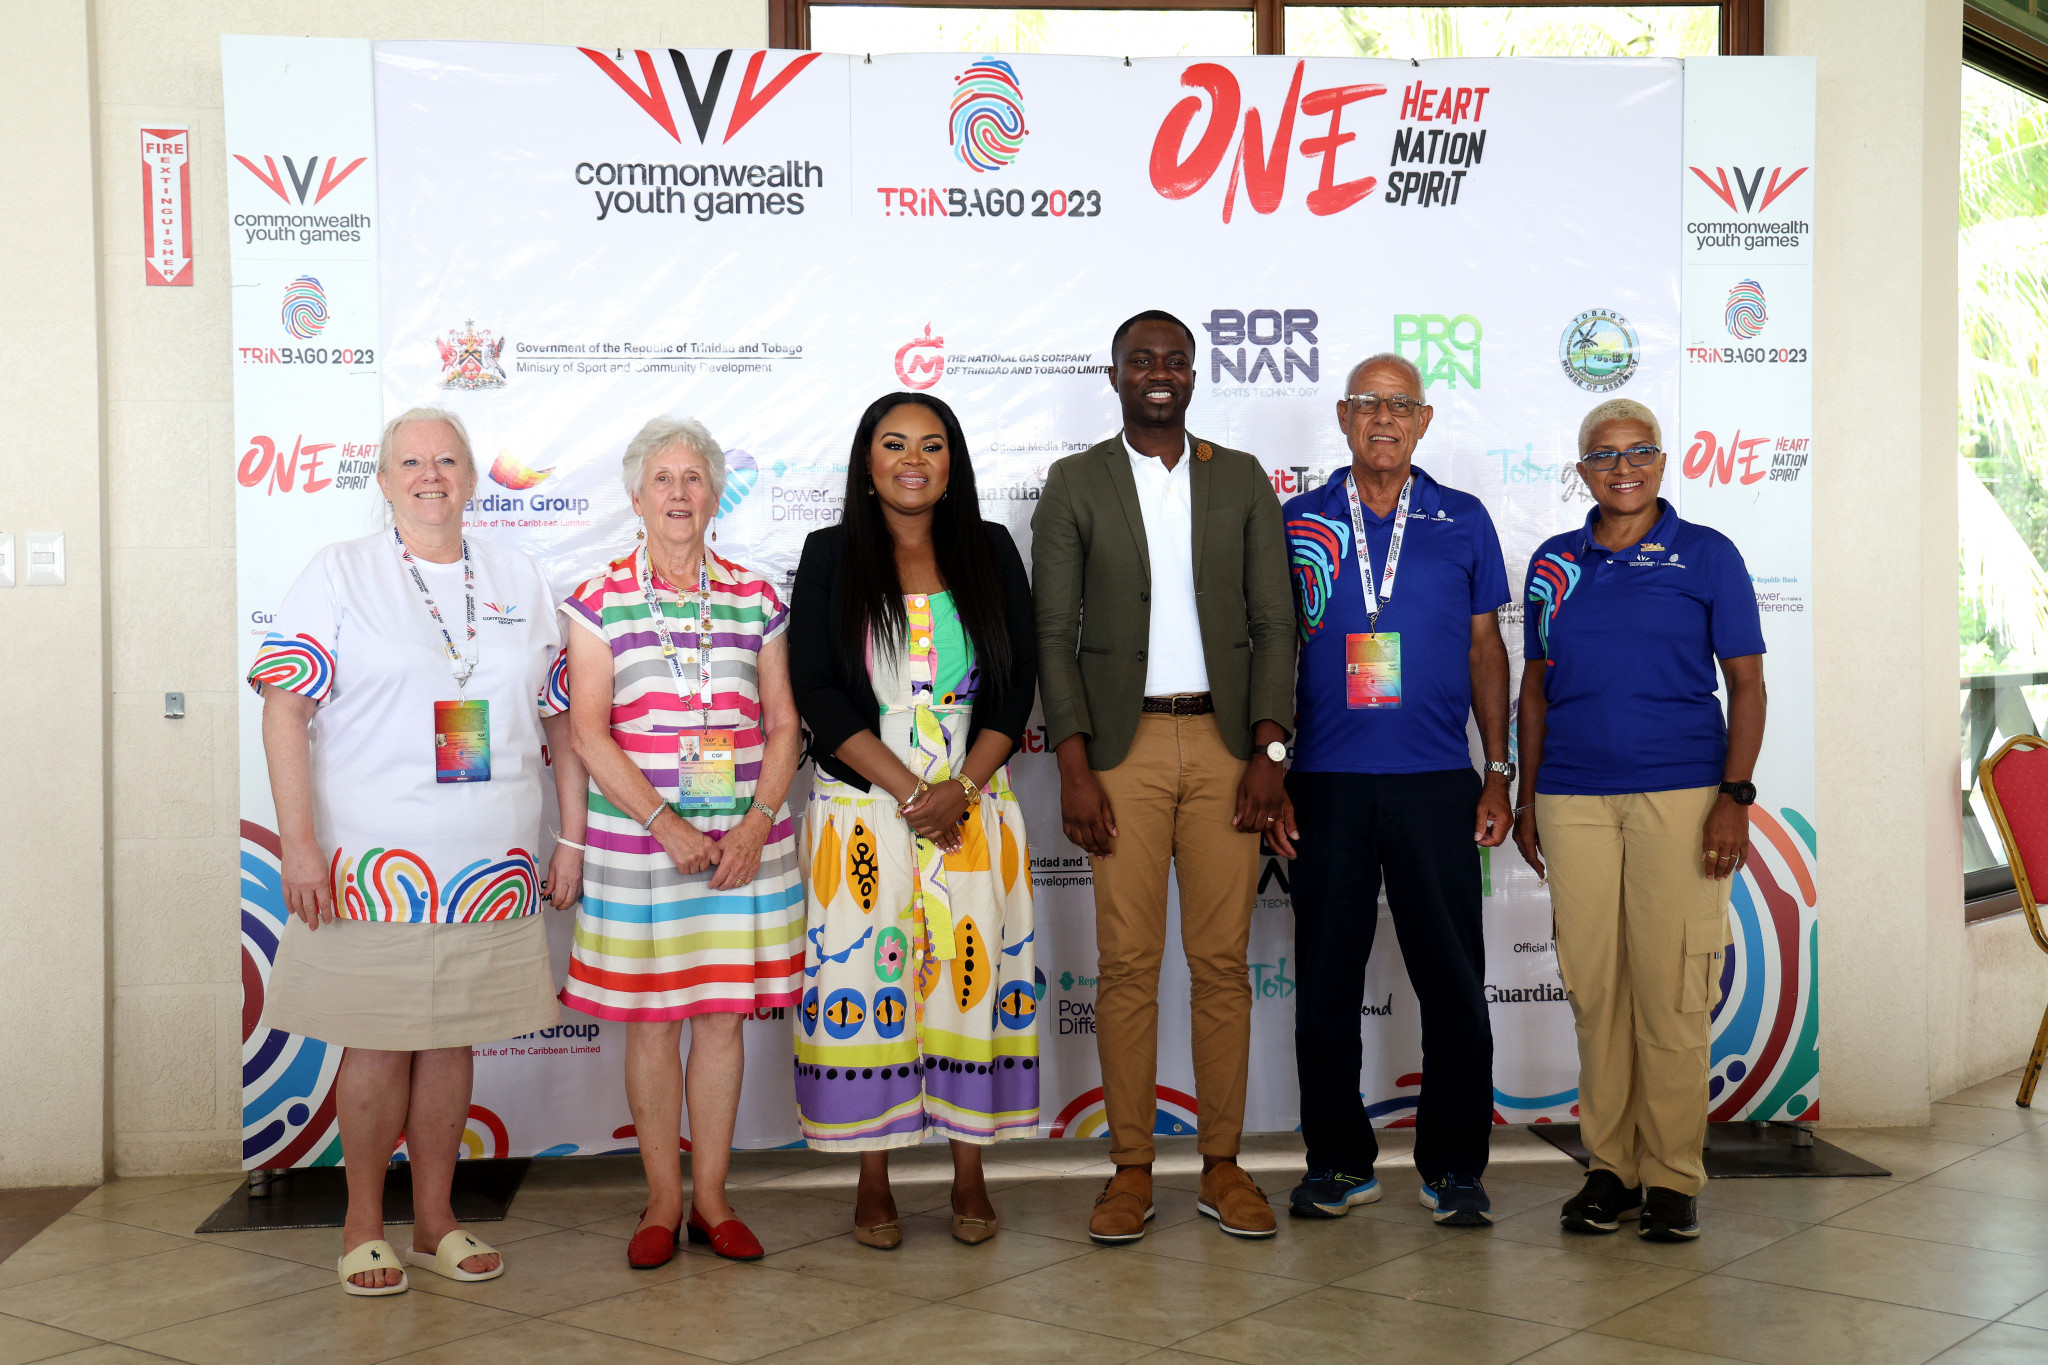 Trinidad and Tobago earns plaudits after "dream" Commonwealth Youth Games ends